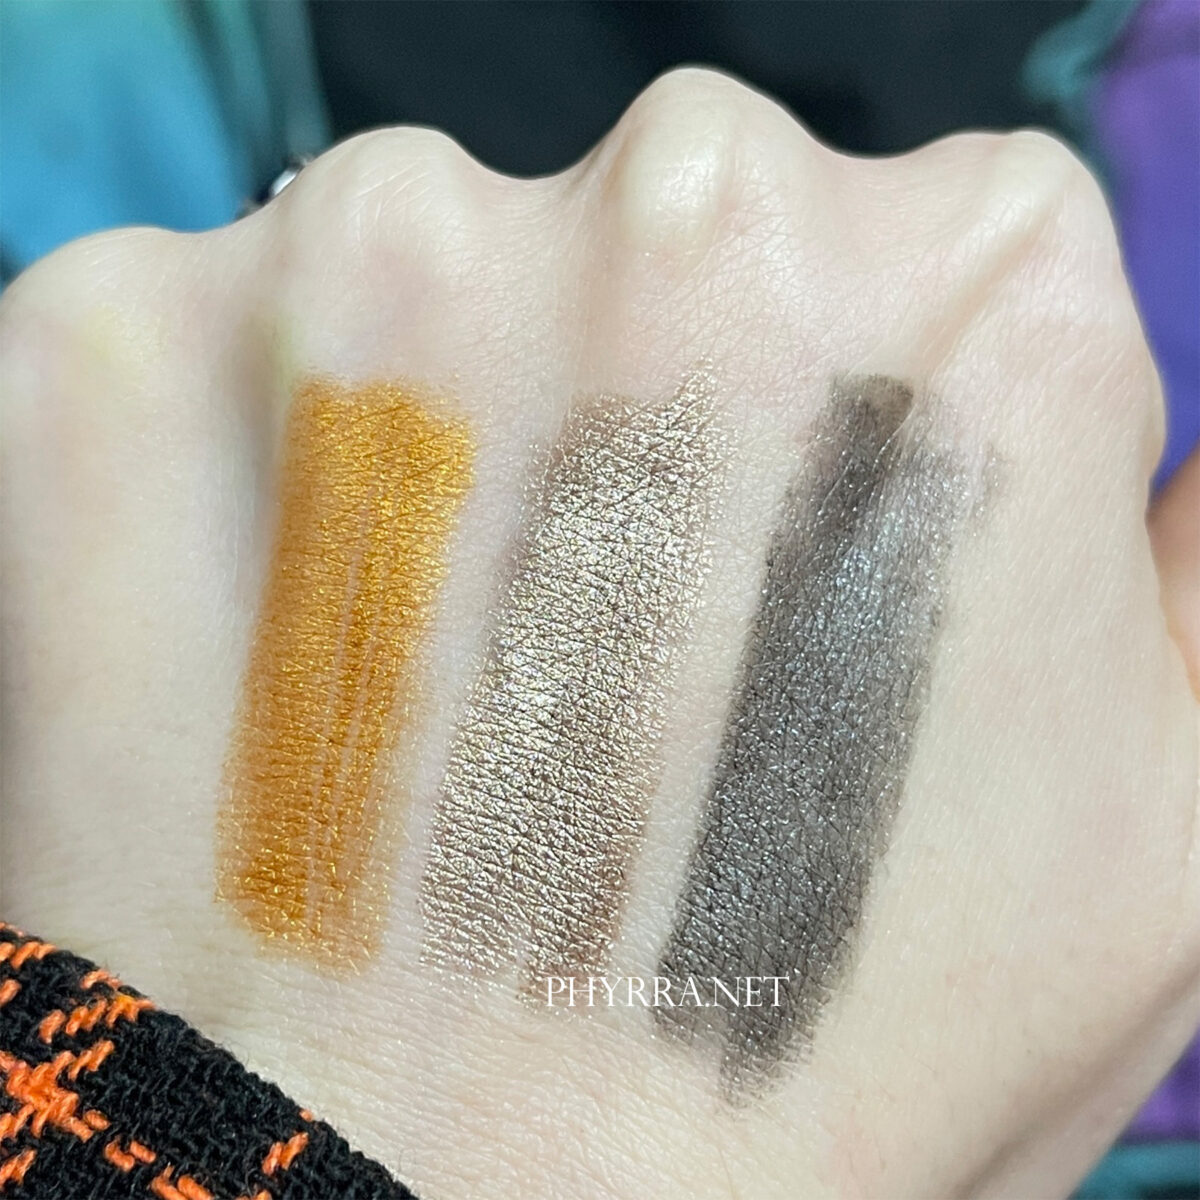 About Face Shadowsticks swatches on light skin